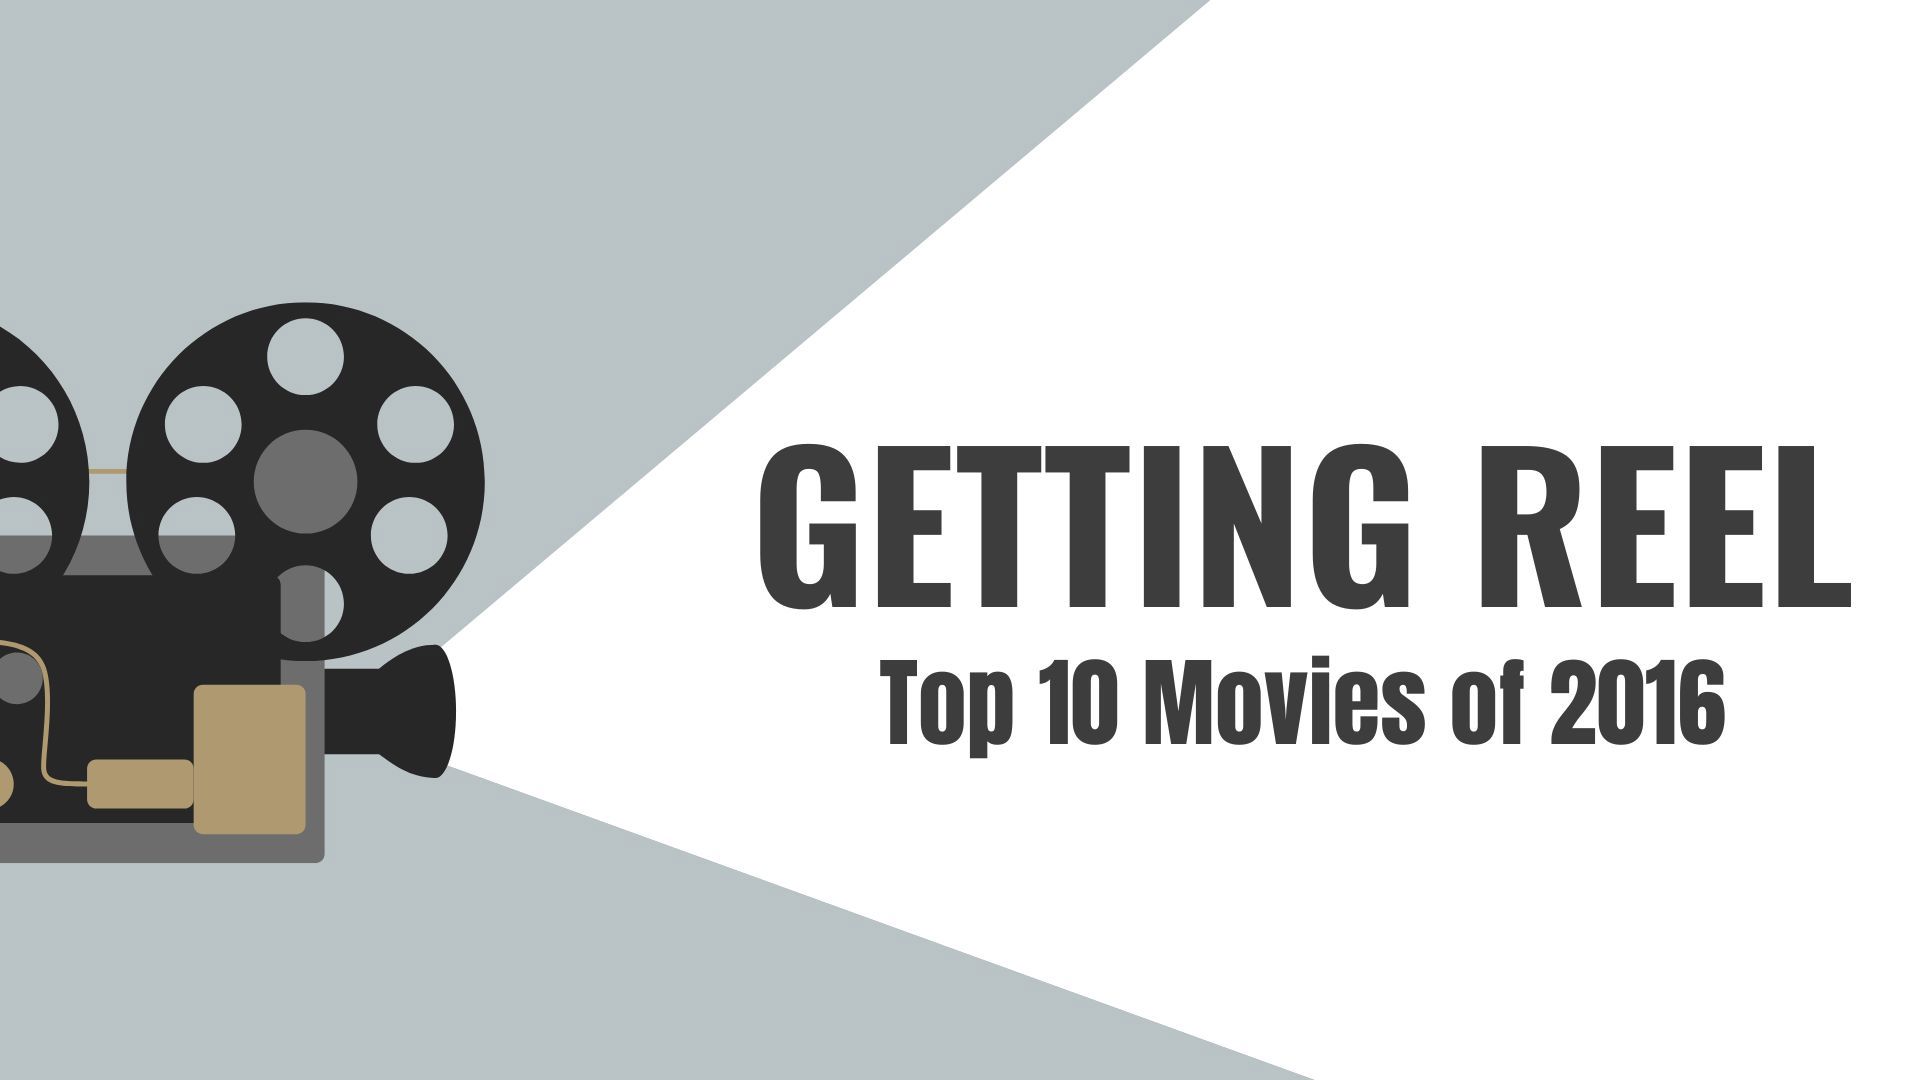 KTHV movie reviewers discuss their top 10 movies of 2016. The list includes multiple ties, including two favorite animated films, as well as documentaries.